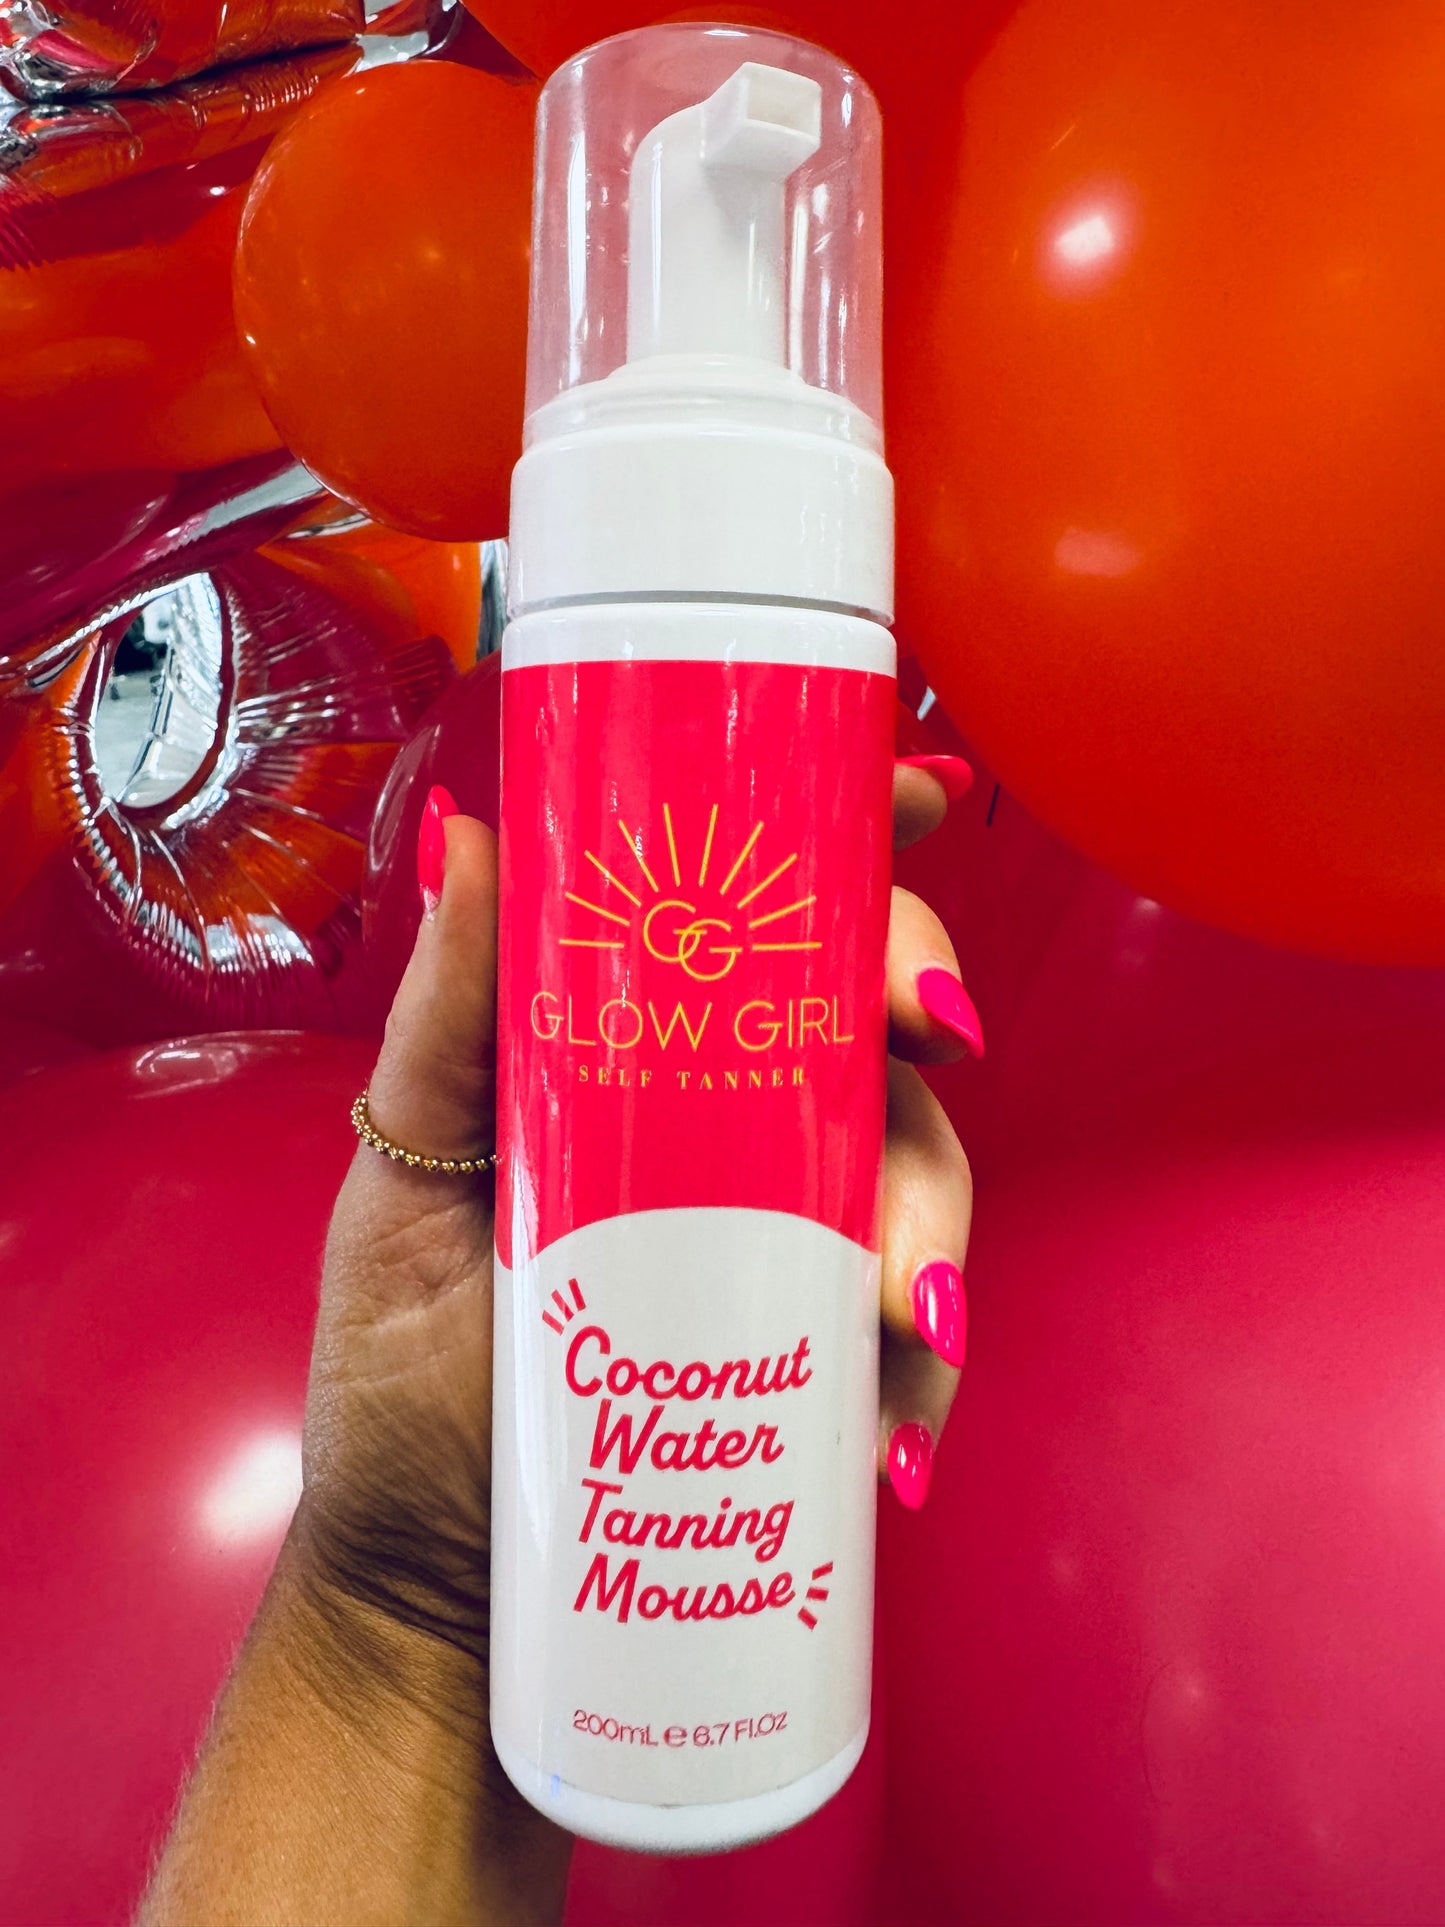 Glow Girl Coconut Water Tanning Mousse